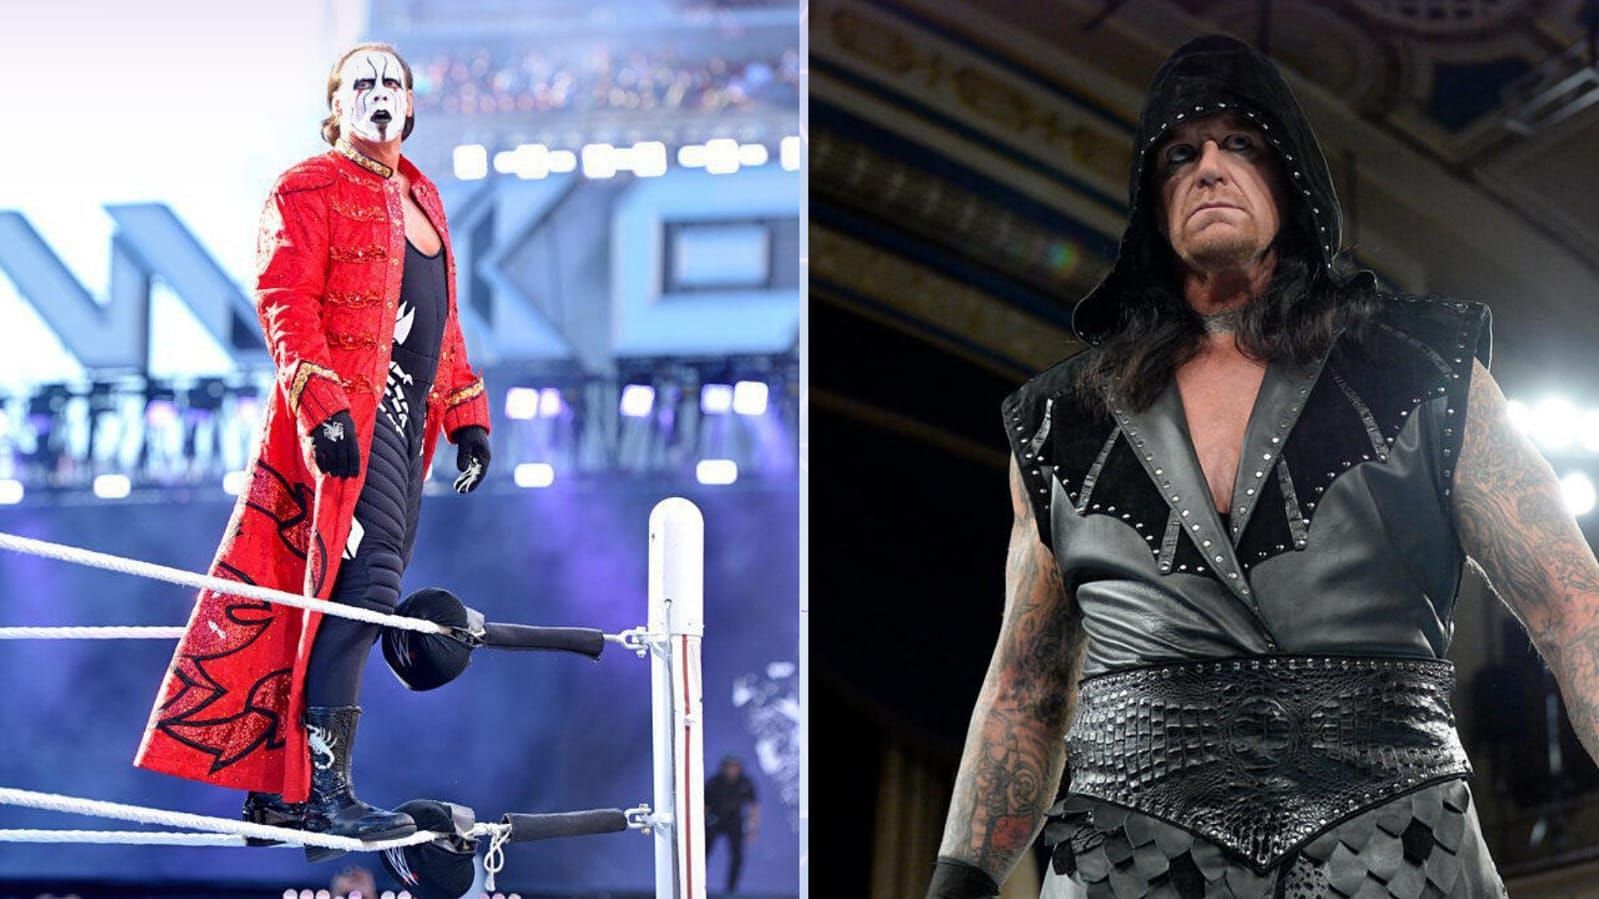 The Undertake vs. Sting is a dream match that never took place